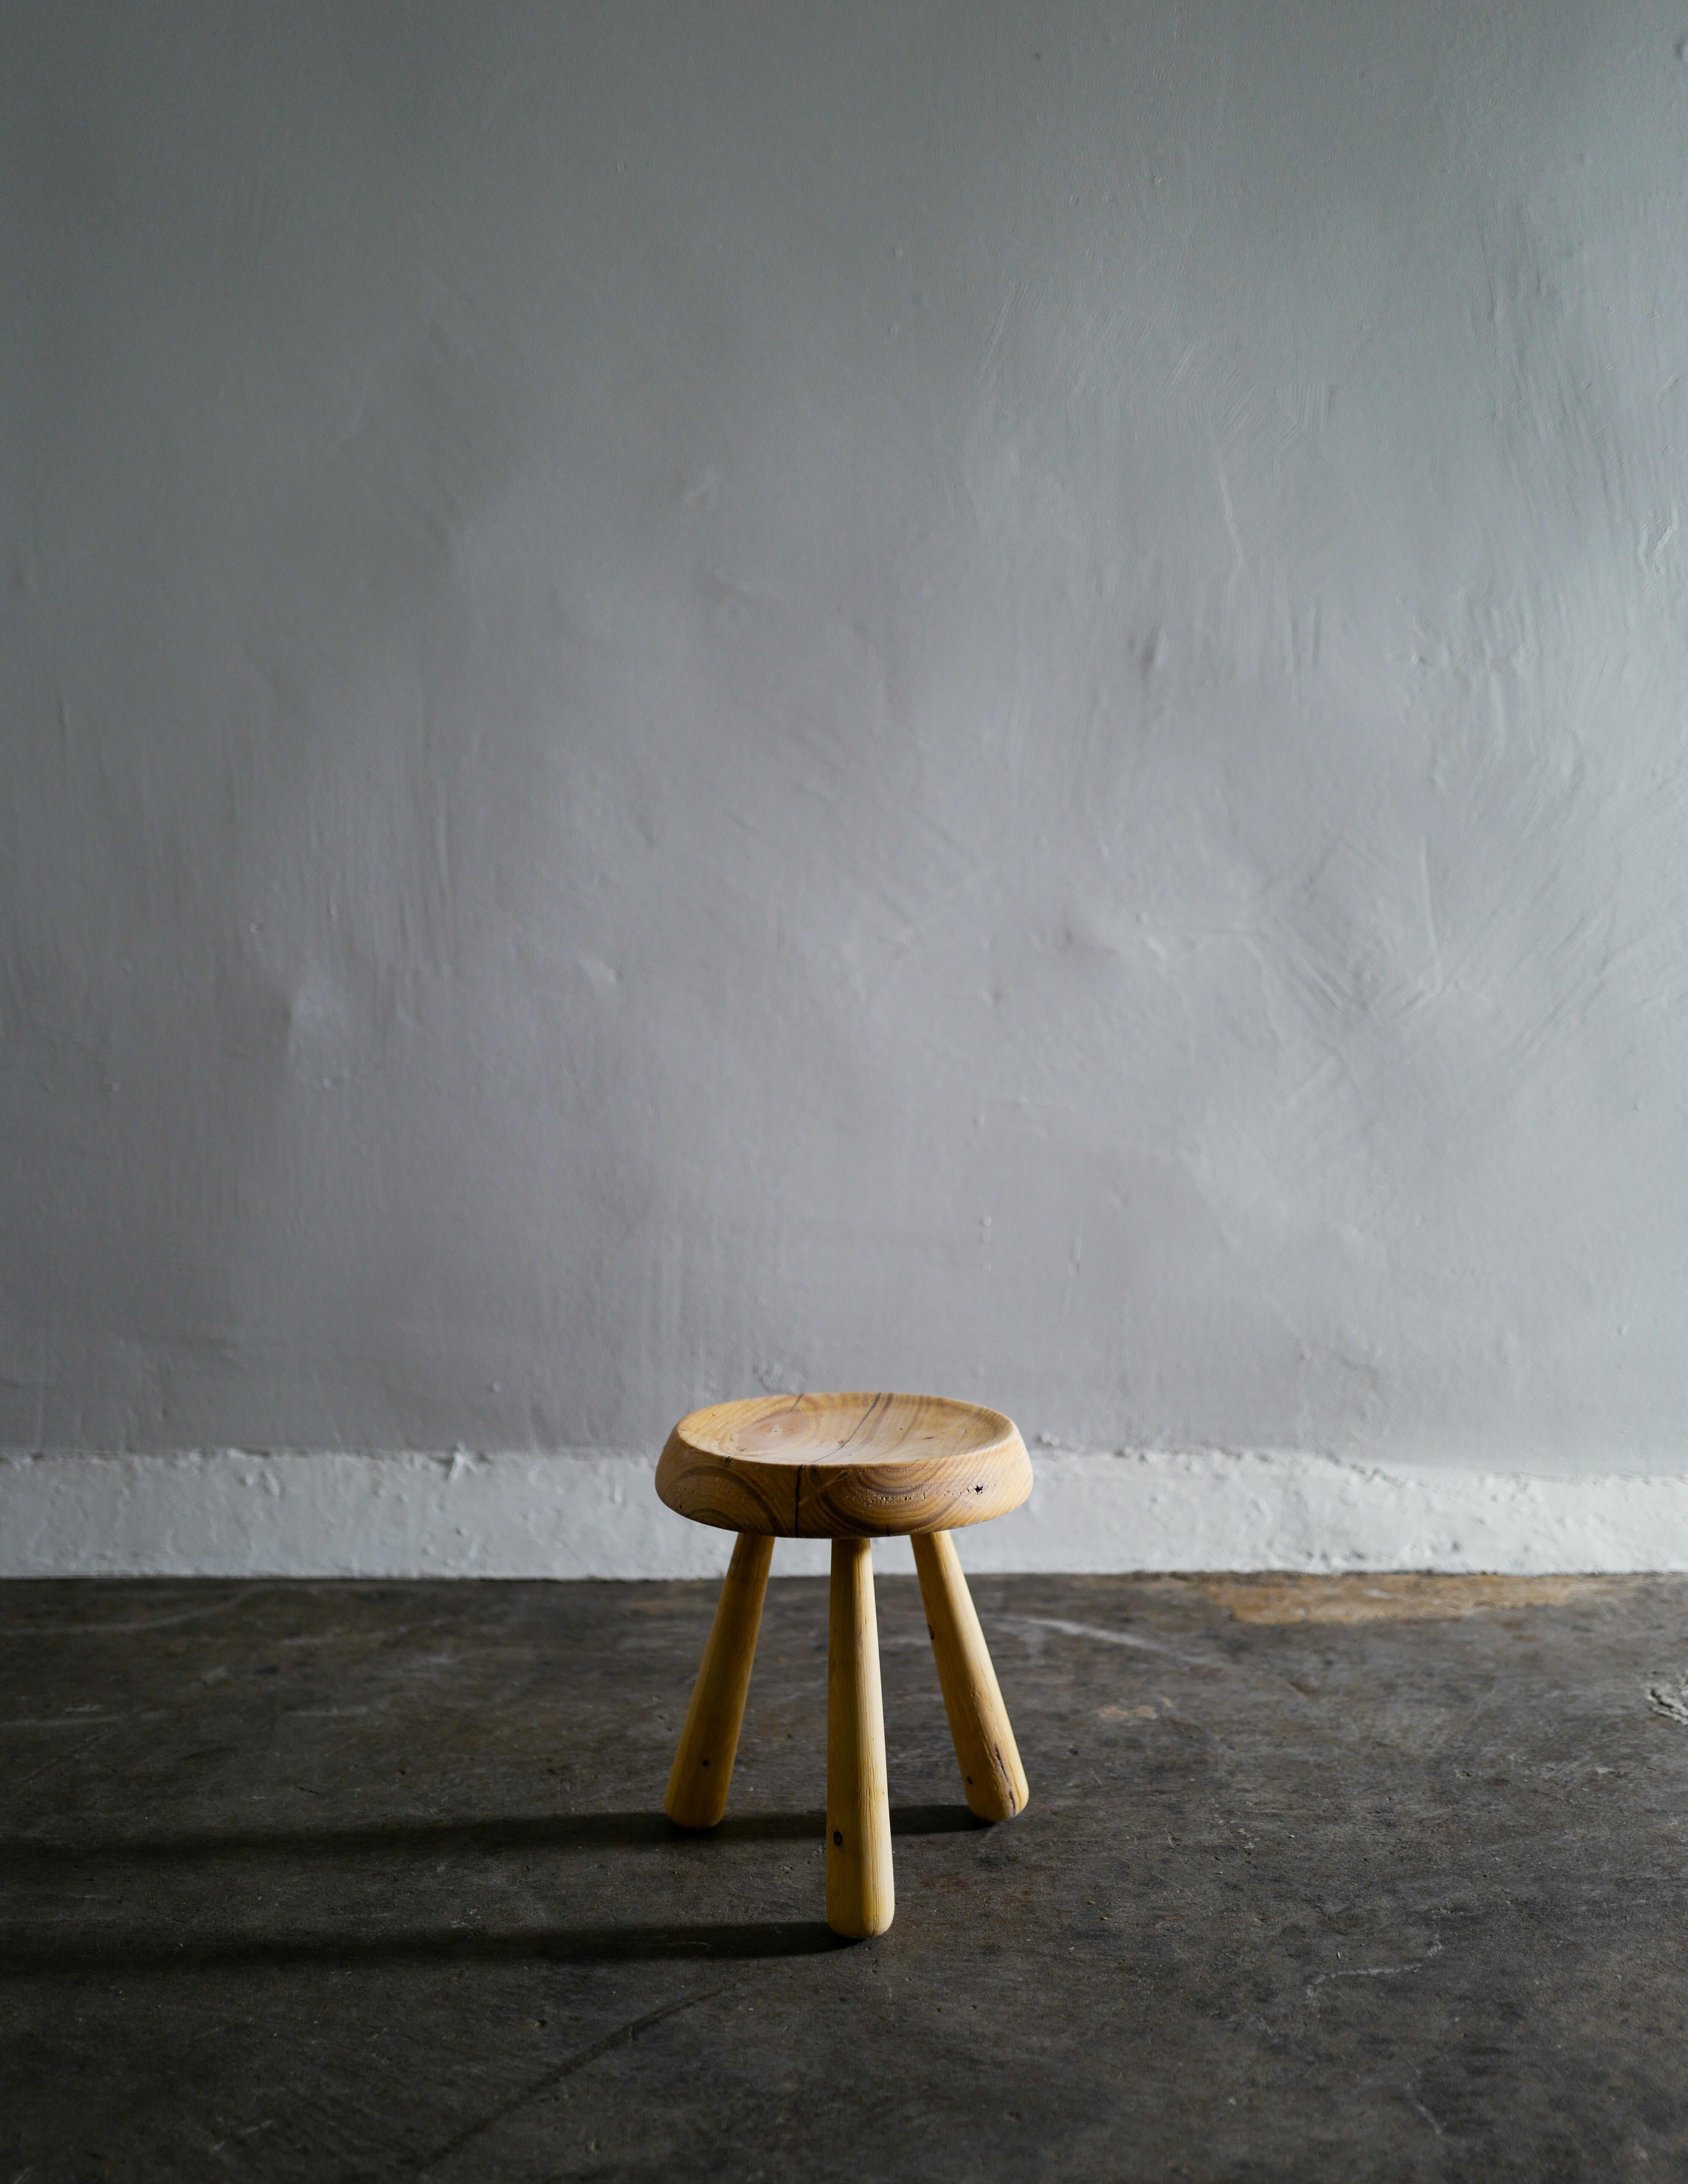 Rare Swedish stool in style of Charlotte Perriand. Stool is made late 80s / early 90s.
In good vintage condition showing small signs from use.